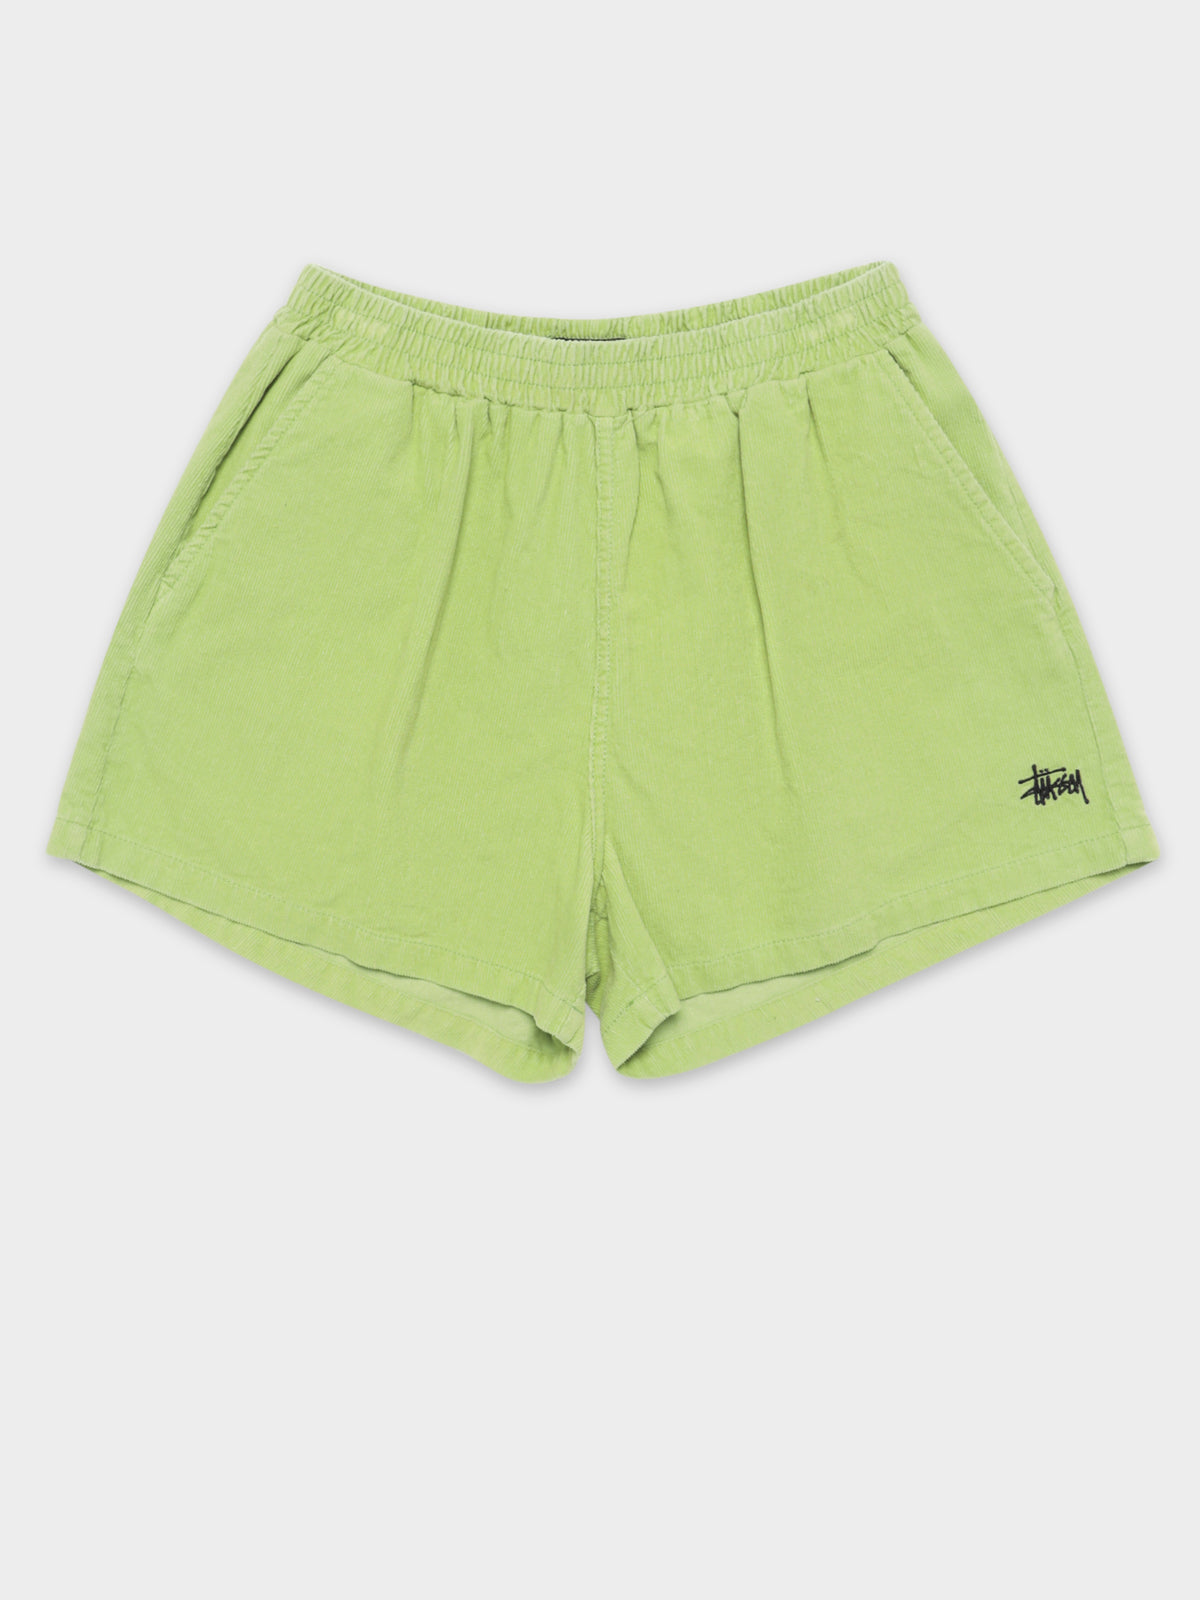 Stock Cord Shorts in Lime